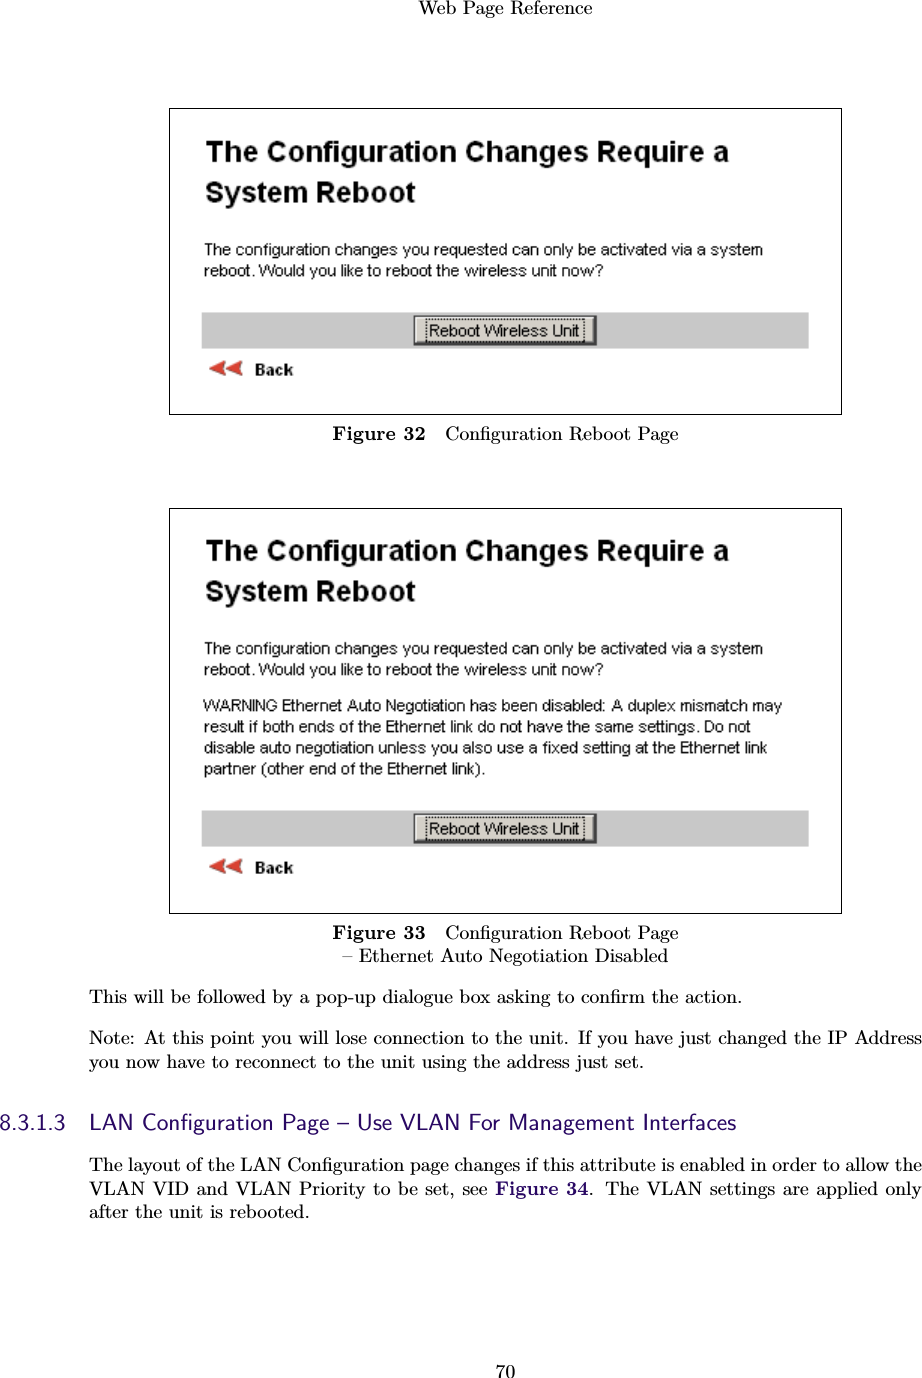 Web Page Reference70Figure 32 Conﬁguration Reboot PageFigure 33 Conﬁguration Reboot Page– Ethernet Auto Negotiation DisabledThis will be followed by a pop-up dialogue box asking to conﬁrm the action.Note: At this point you will lose connection to the unit. If you have just changed the IP Addressyou now have to reconnect to the unit using the address just set.8.3.1.3 LAN Conﬁguration Page – Use VLAN For Management InterfacesThe layout of the LAN Conﬁguration page changes if this attribute is enabled in order to allow theVLAN VID and VLAN Priority to be set, see Figure 34. The VLAN settings are applied onlyafter the unit is rebooted.